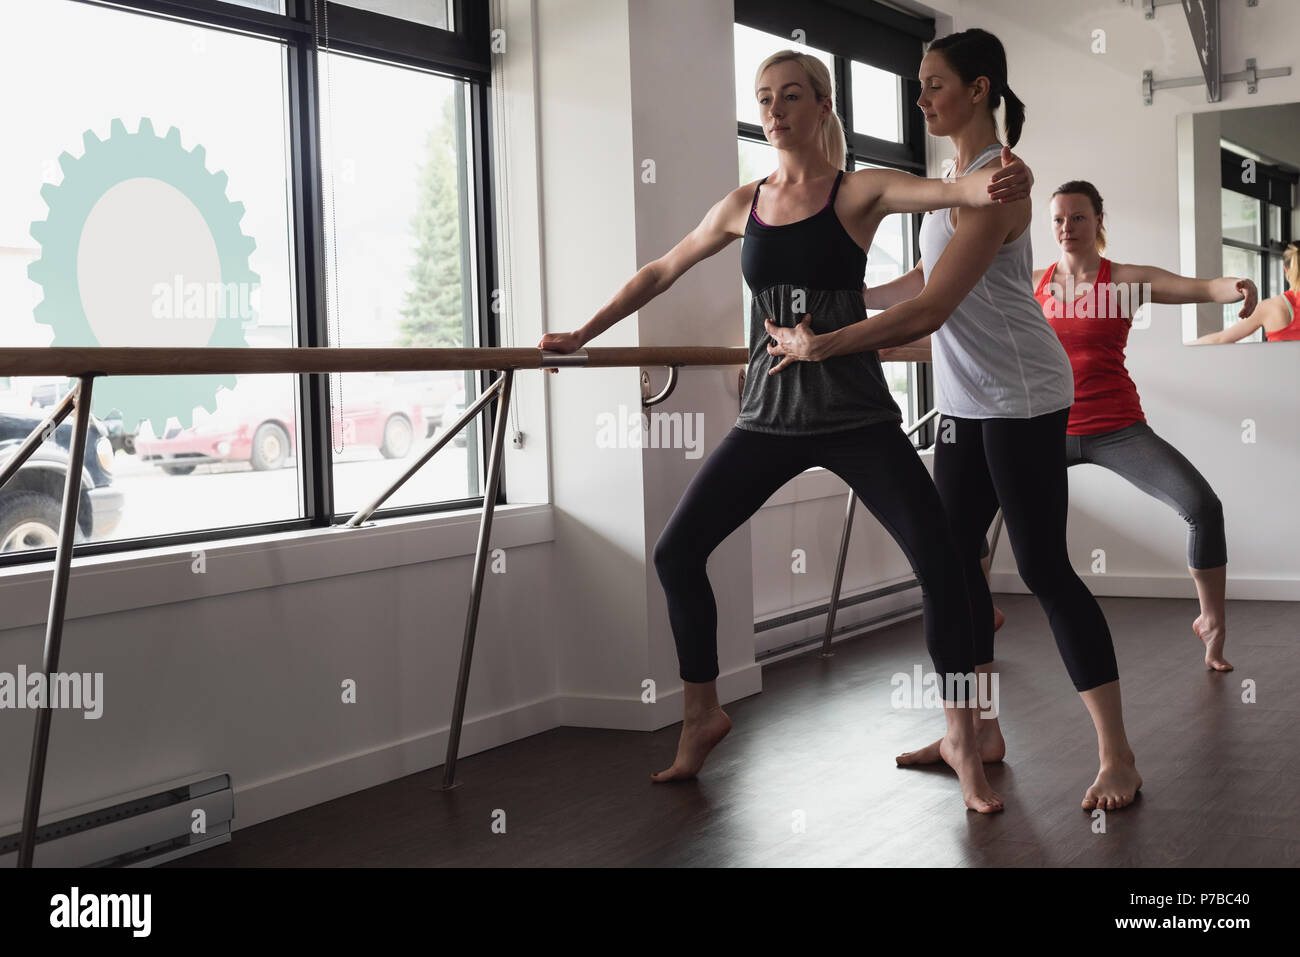 Trainer assisting young woman stretching on barre Stock Photo